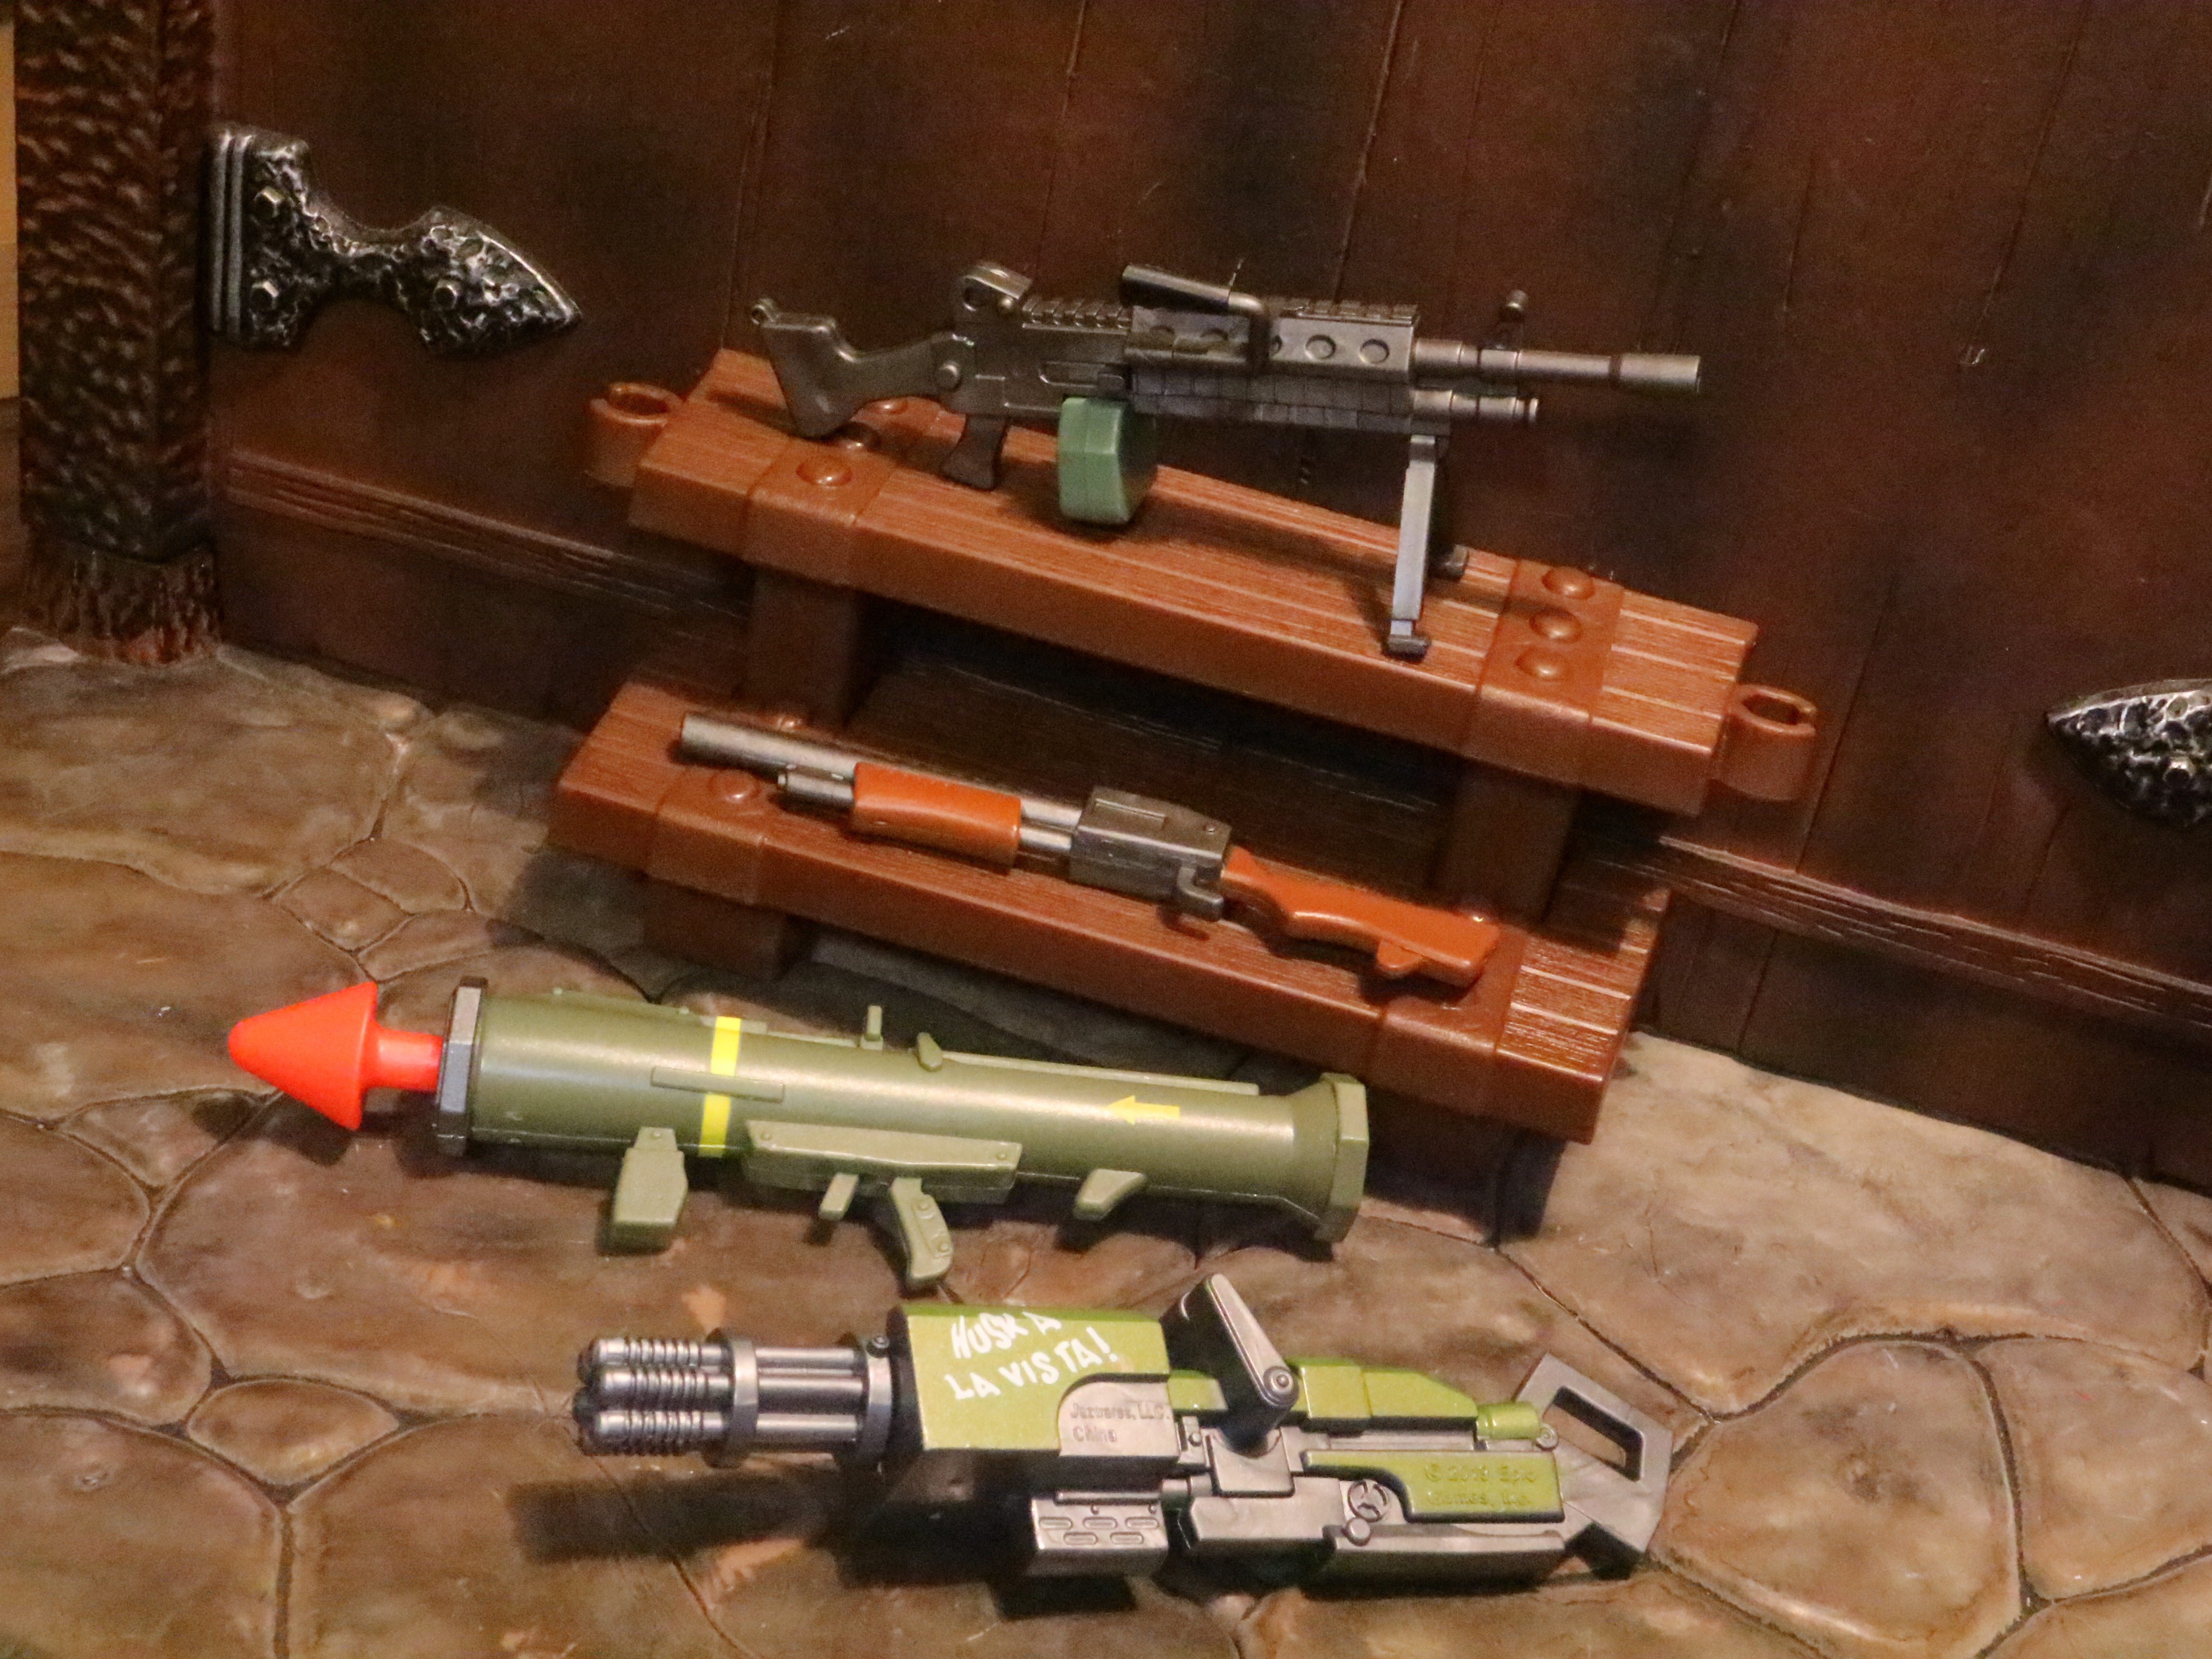 Fortnite Action Figure Weapons and Accessories Lot #1